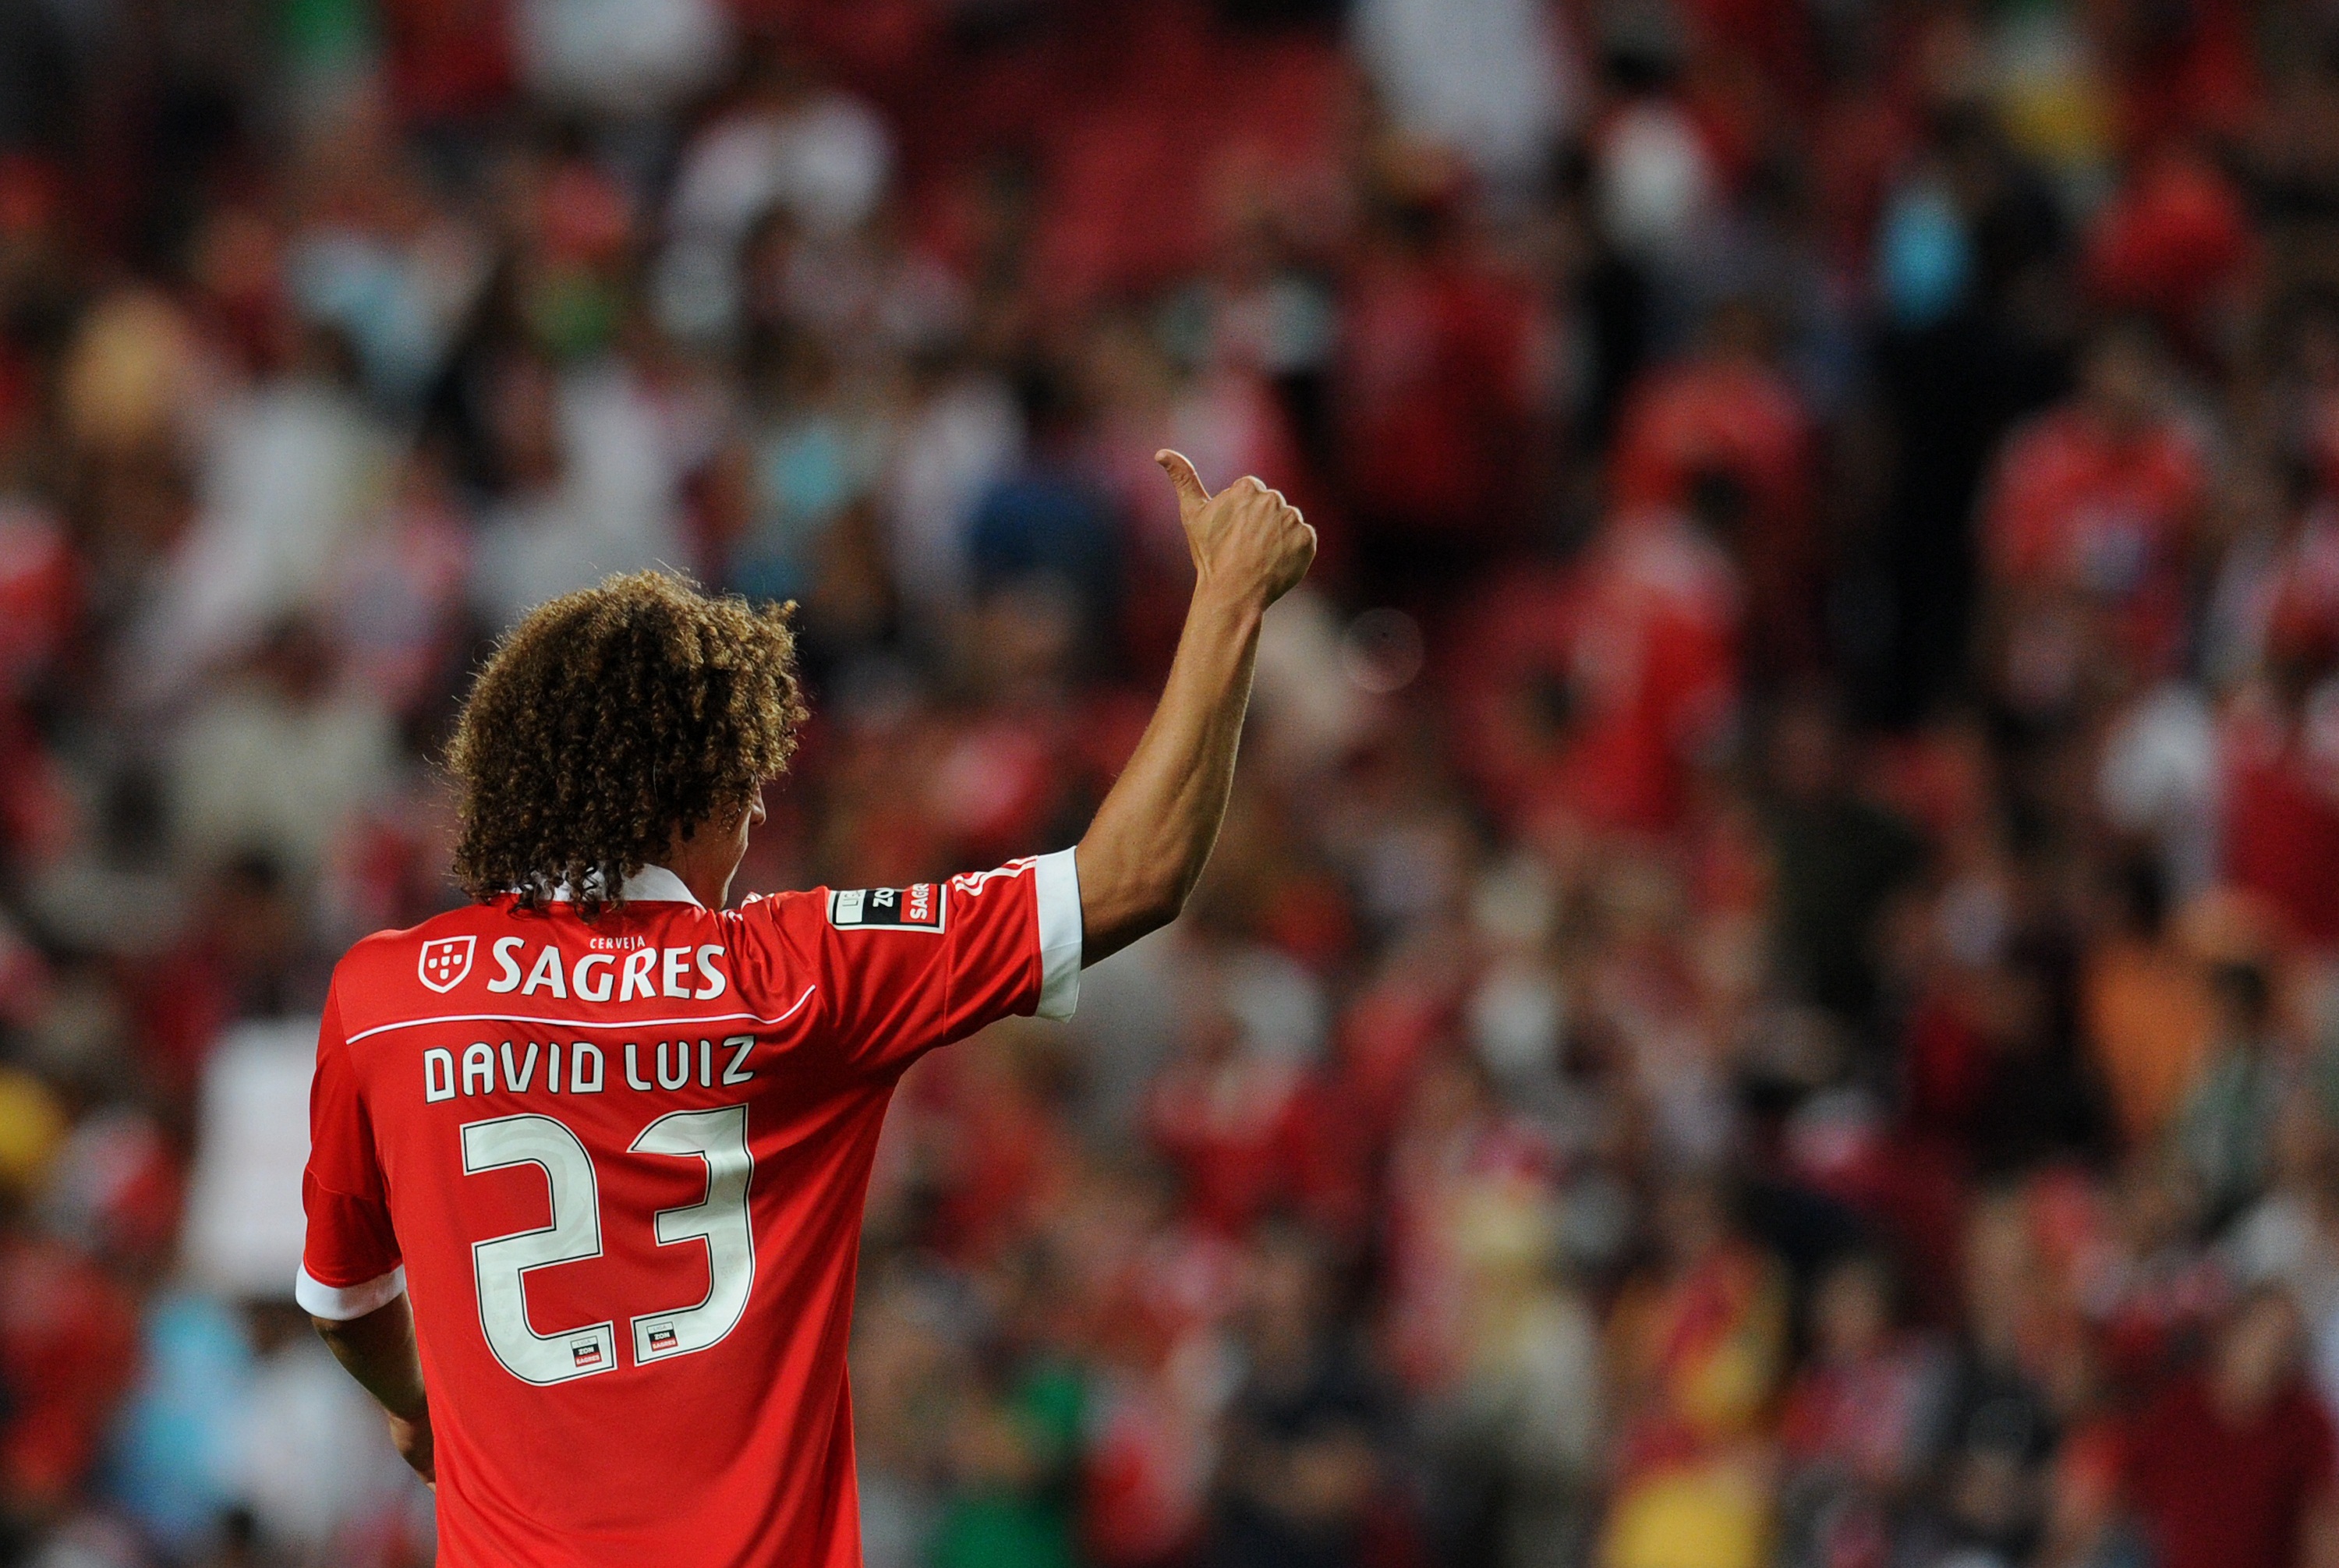 LISBON, PORTUGAL - AUGUST 28:  David Luiz of Benfica gives a thumbs up to the fans during the Portuguese Liga match between Vitoria Setubal and Benfica at Luz Stadium on August 28, 2010 in Lisbon, Portugal.  (Photo by Patricia de Melo/EuroFootball/Getty I